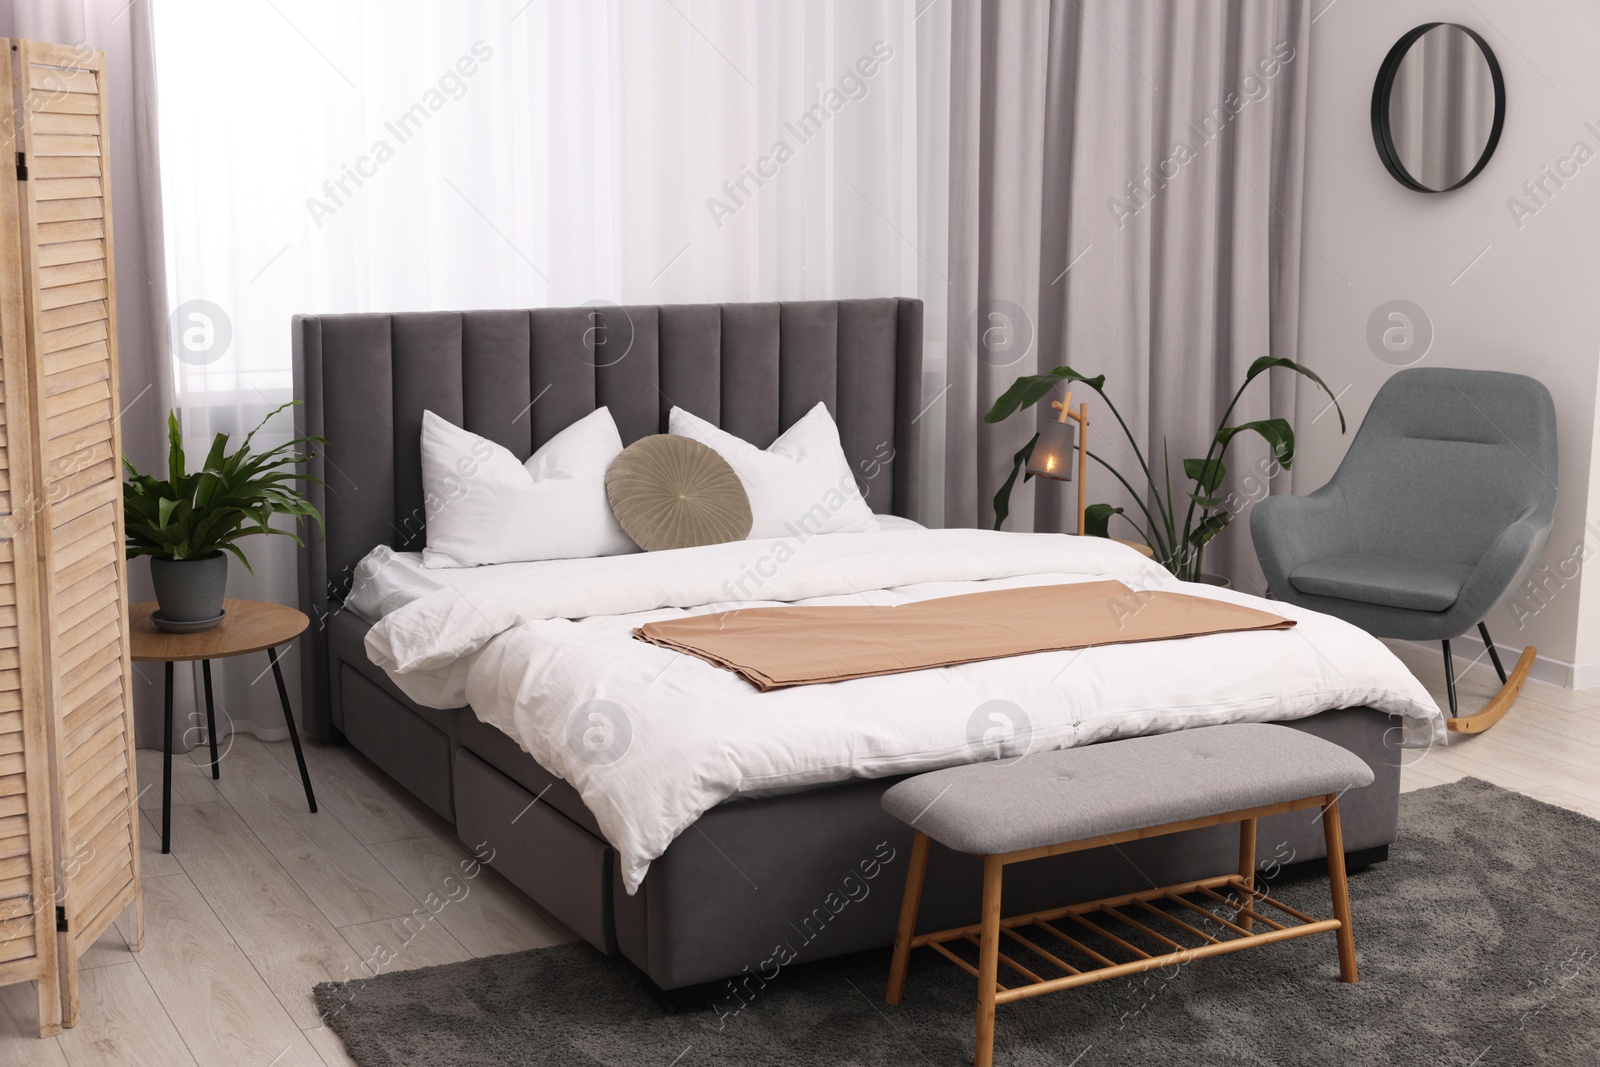 Photo of Stylish bedroom interior with large bed, ottoman, lamp and houseplants